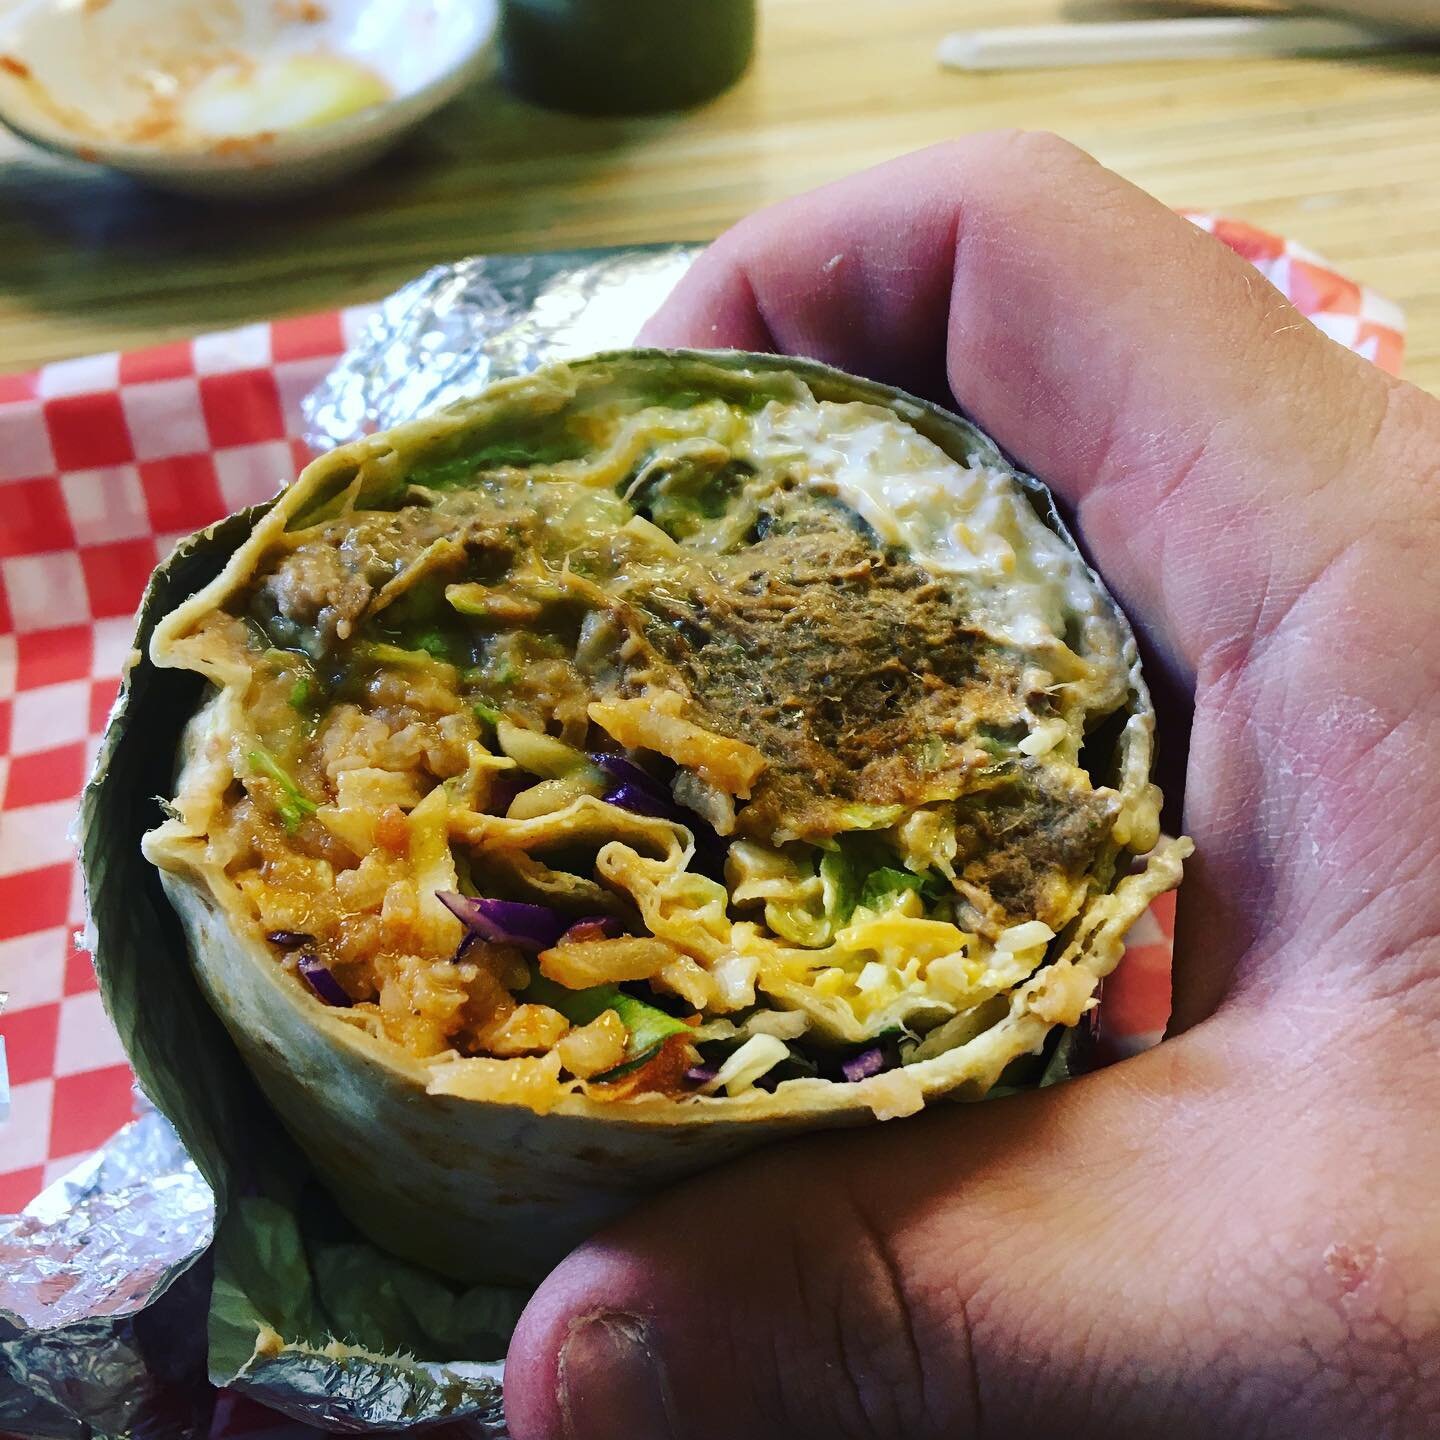 Yo for real tho. This burrito finally made me understand what that Creed song was about. #barbacoa #burrito #streettacos #canyoutakemehigher #food